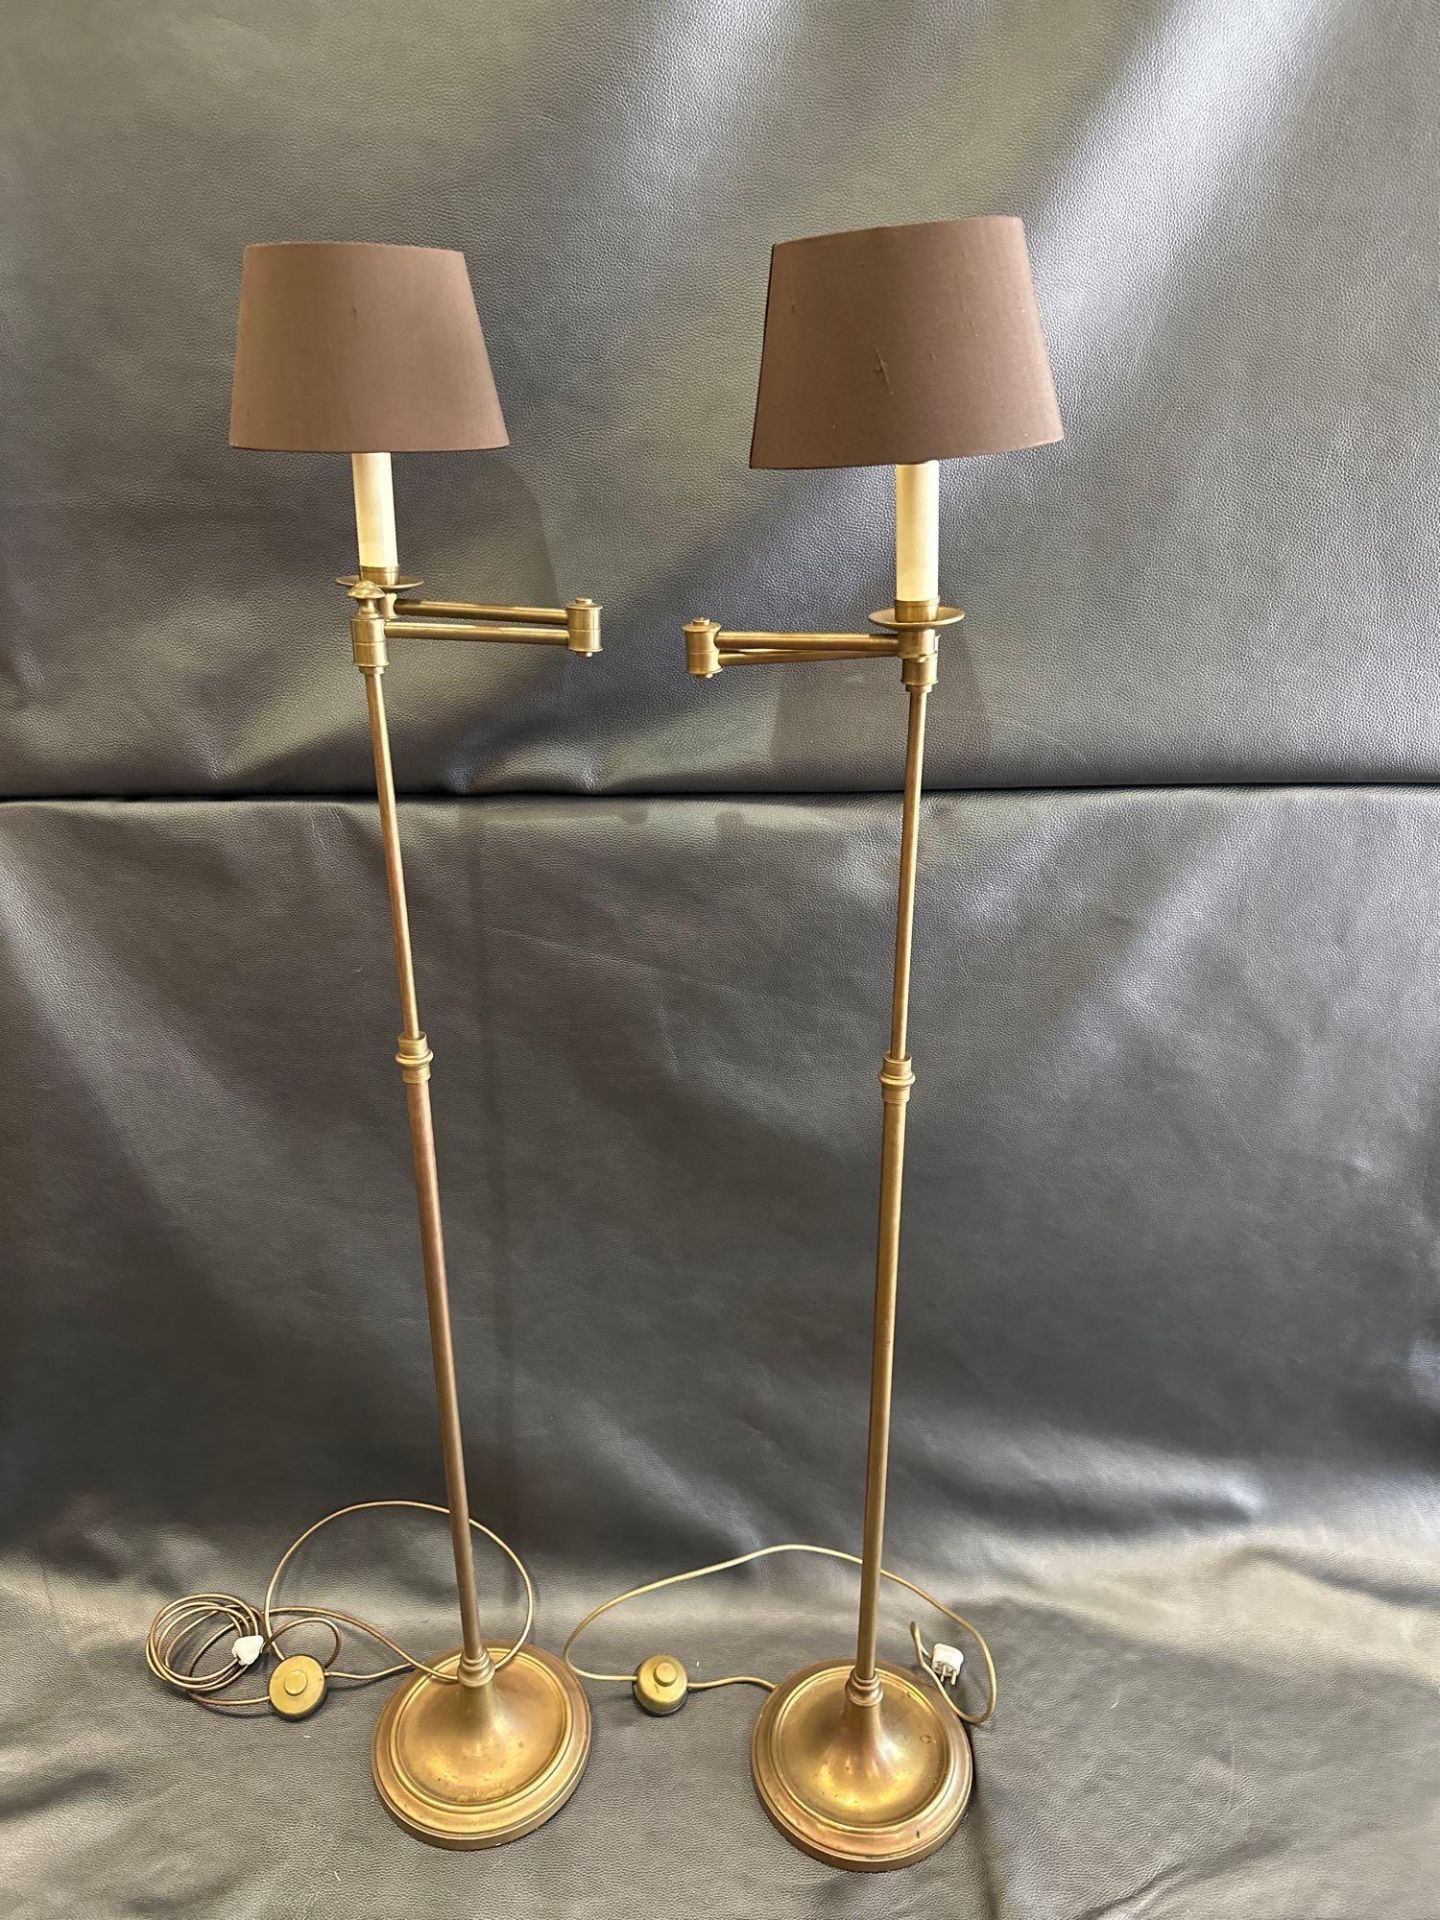 A Pair Library Floor Lamps Finished In English Bronze Swing Arm Function With Shade 156cm - Image 3 of 4